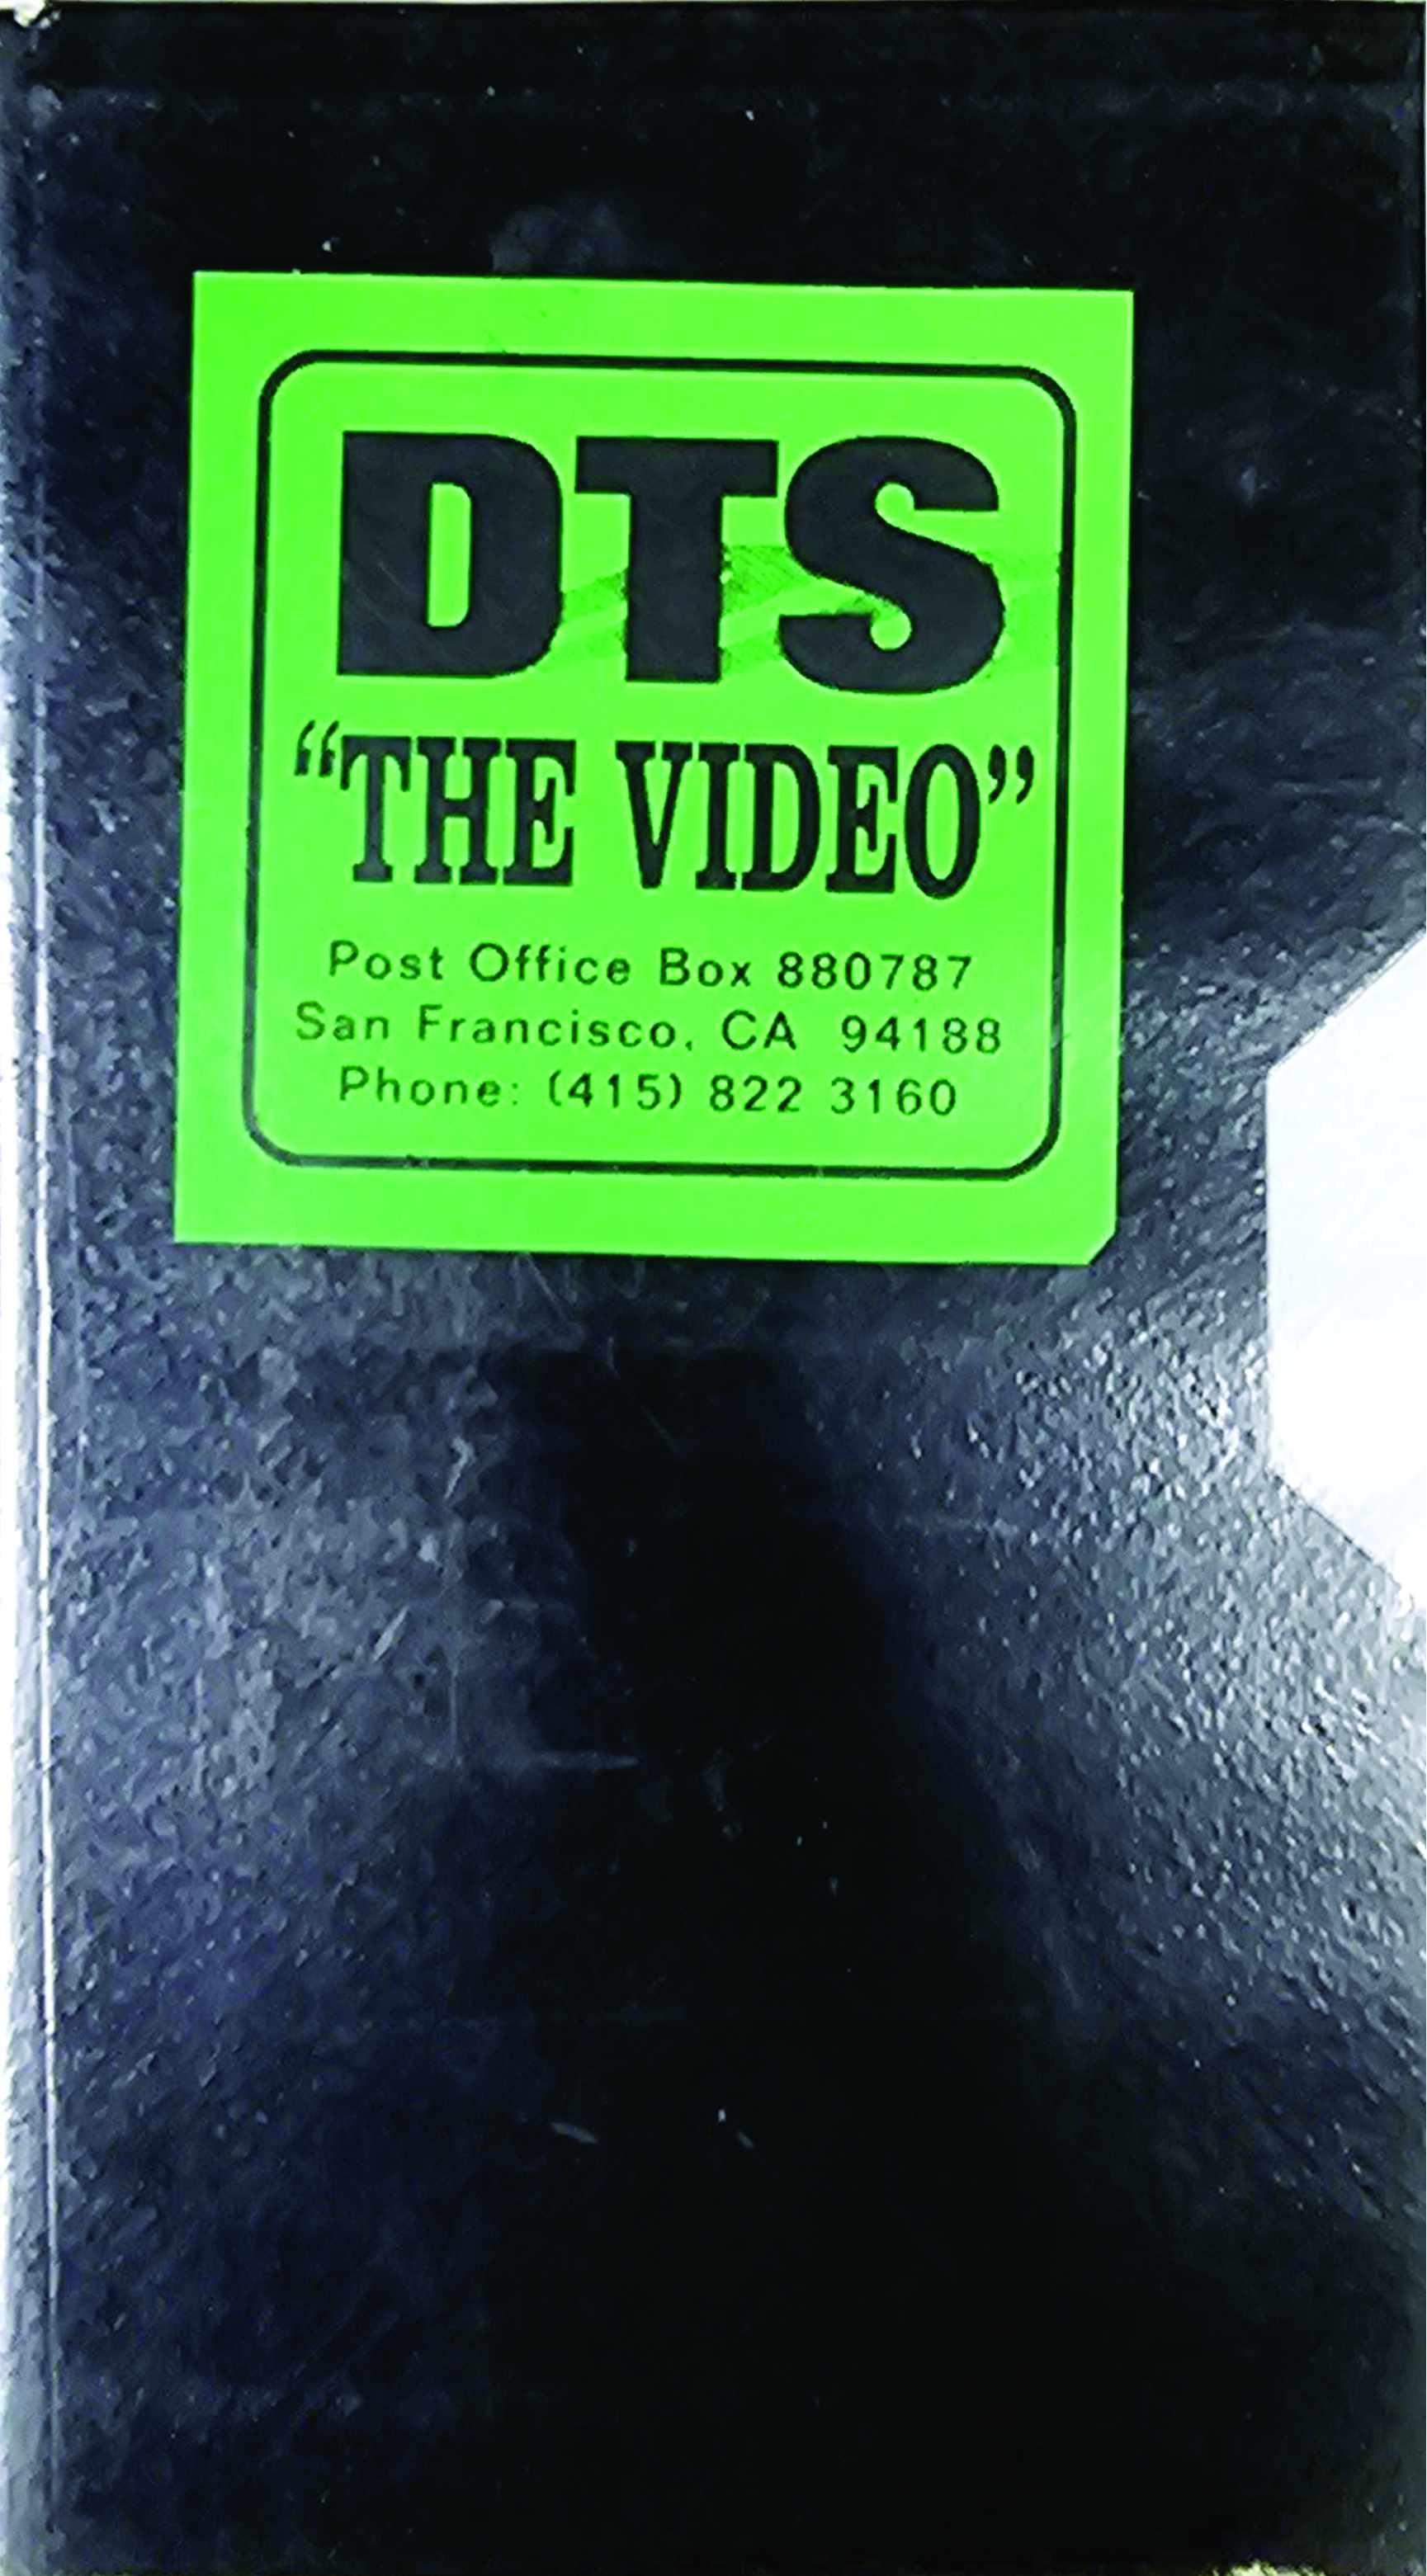 Dogtown - DTS - The Video cover art